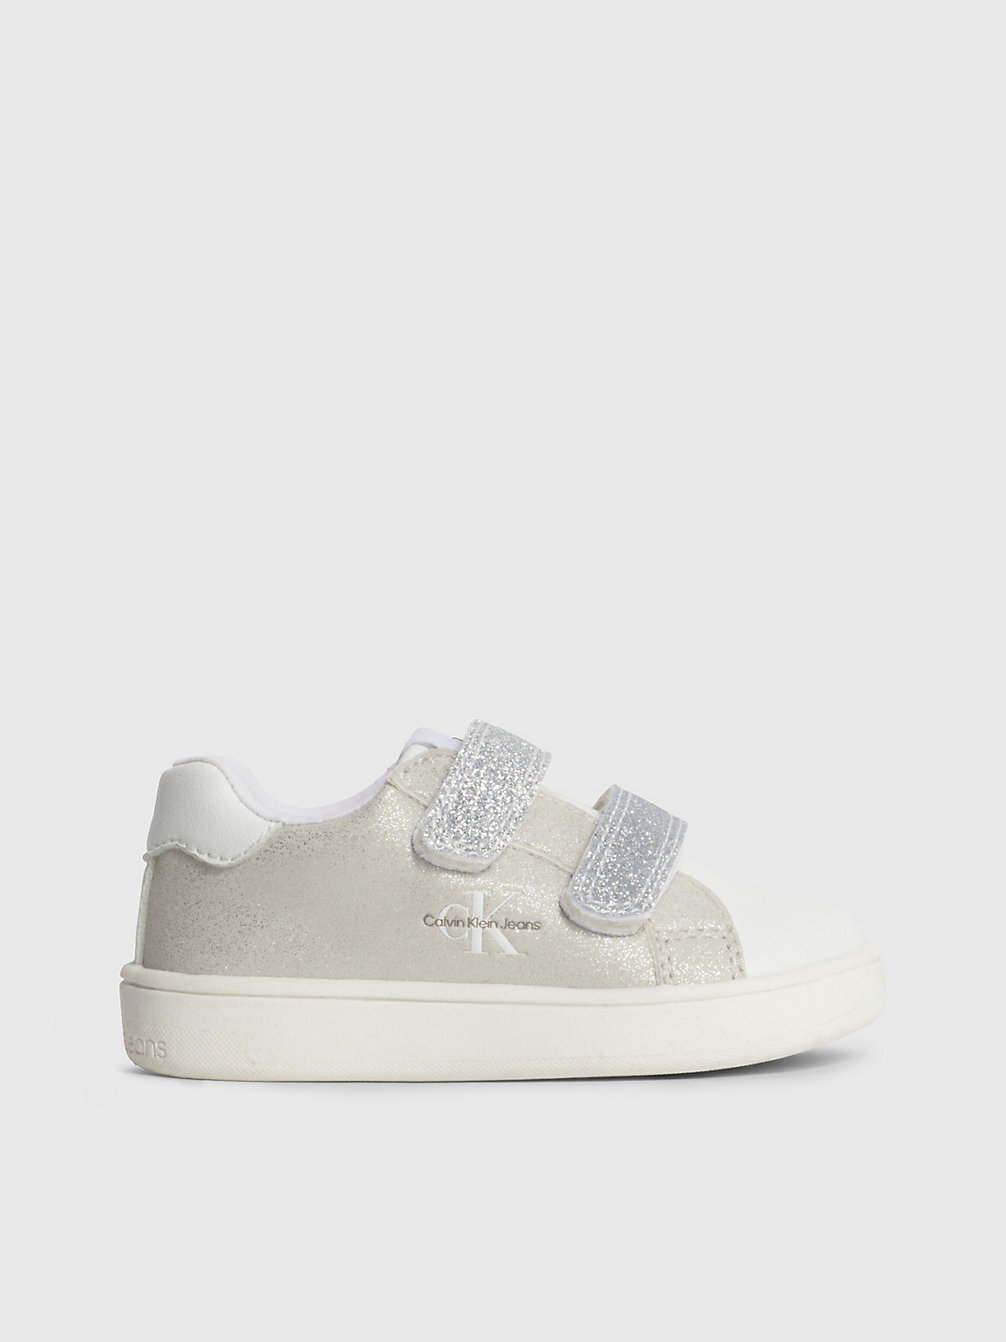 WHITE/GREY/SILVER Toddlers And Kids Glitter Trainers undefined girls Calvin Klein